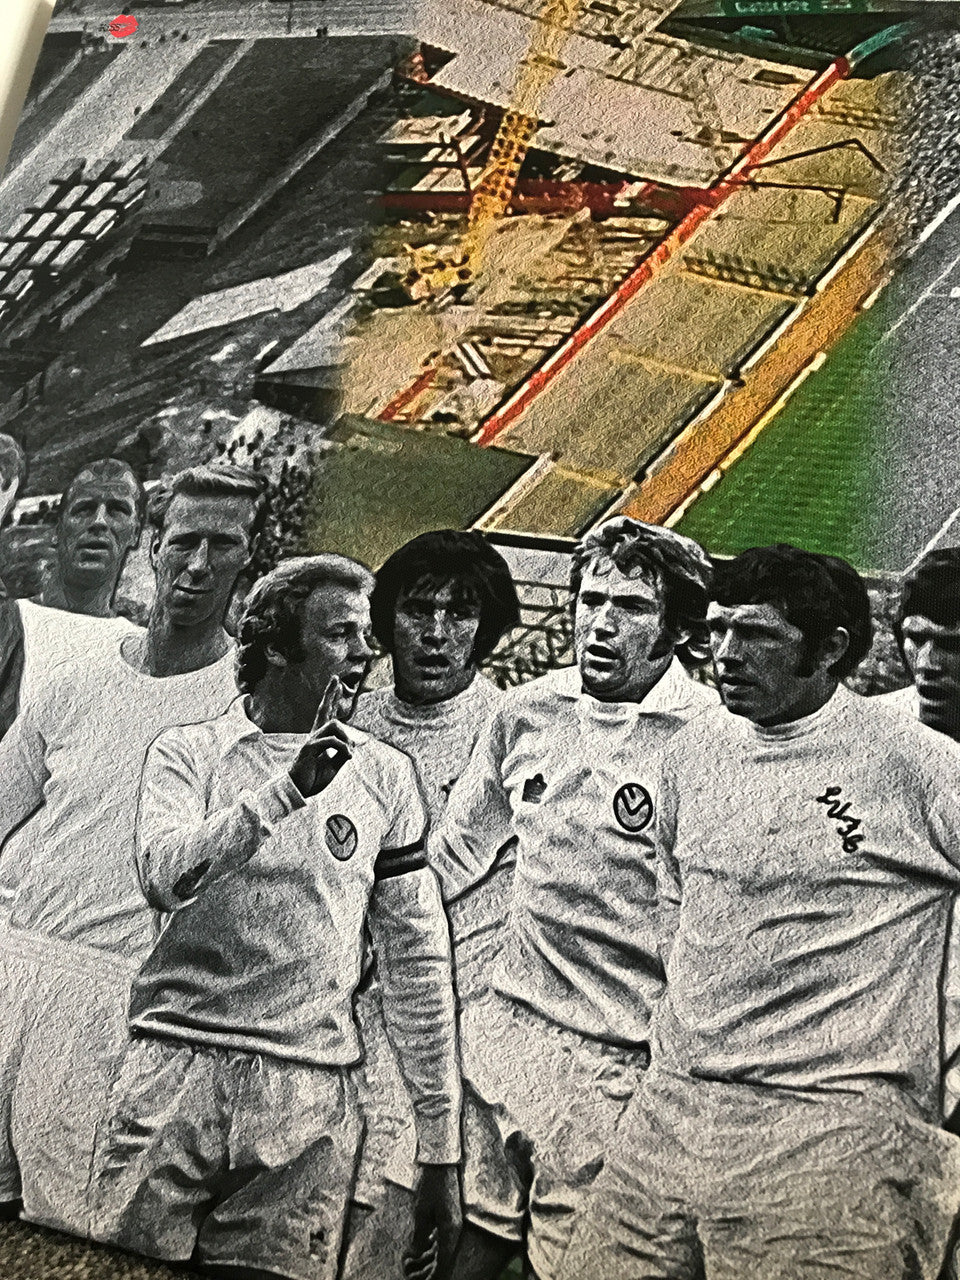 LUFC Panoramic KiSS Canvas - Leeds United Football MOT - Timeline - Then and Now - Unique Artwork - Football Elland Road Wall Art